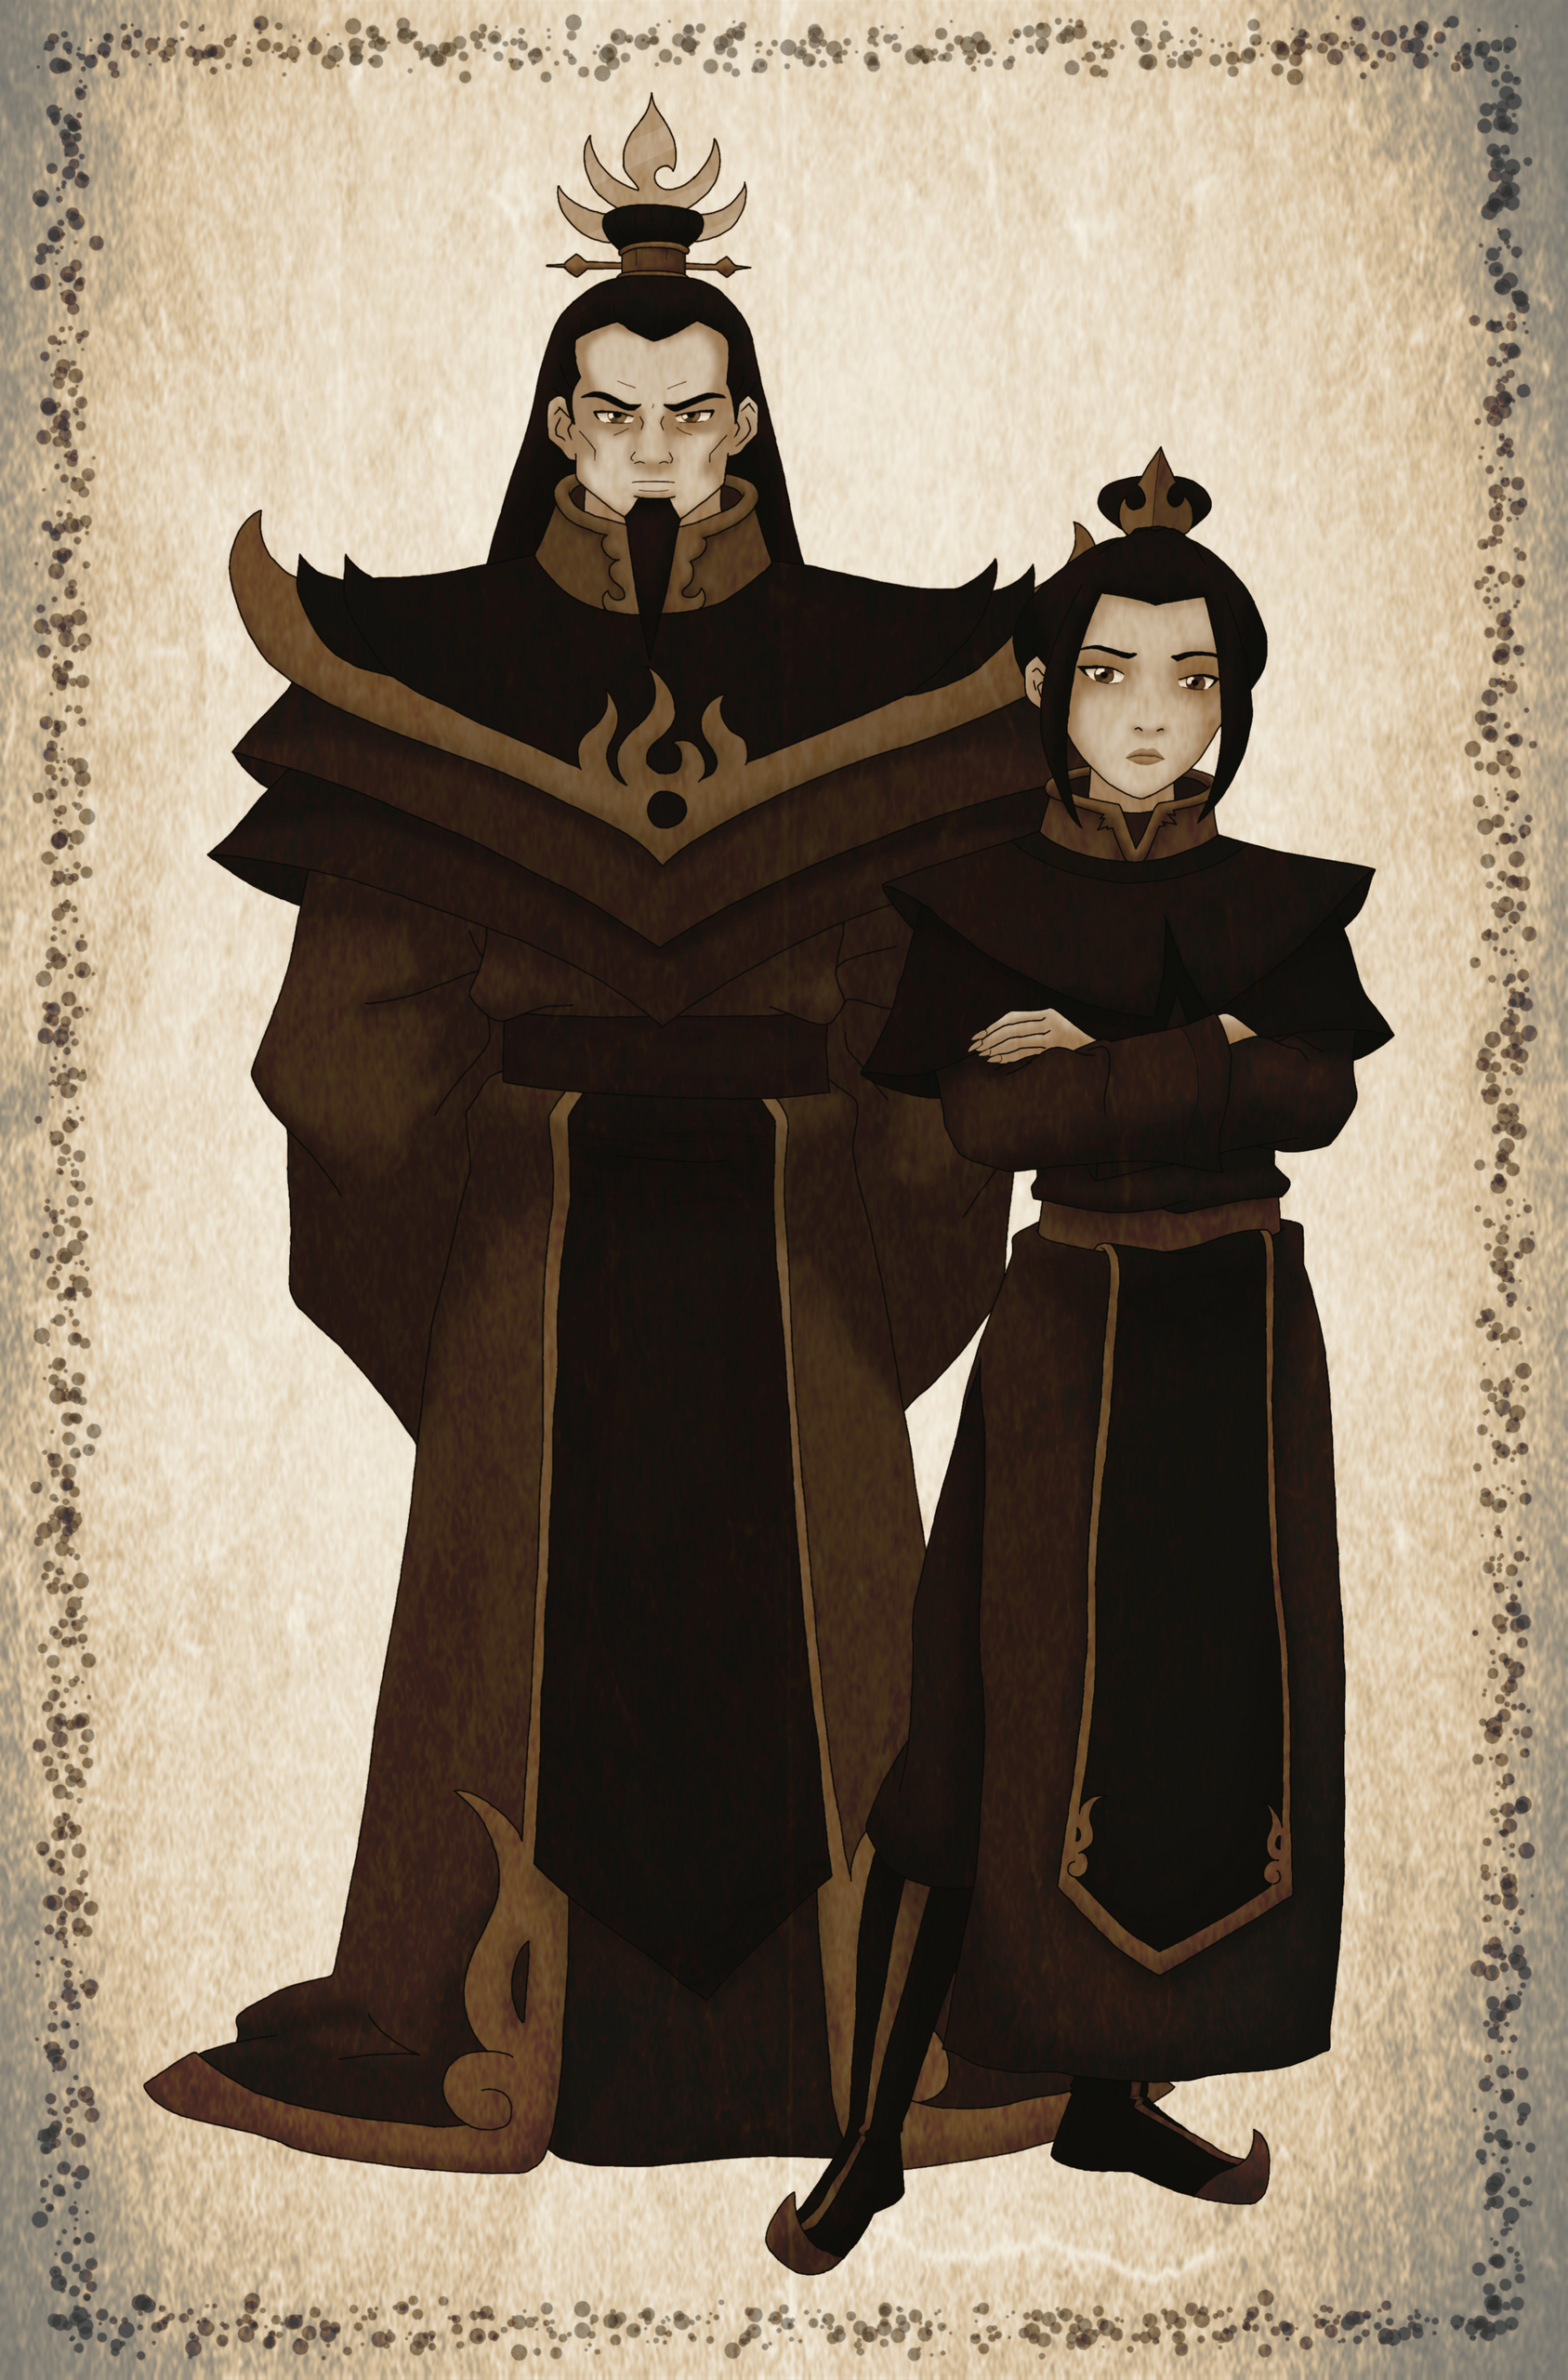 The Fire Nation Royal Family Image Portrait HD Wallpaper